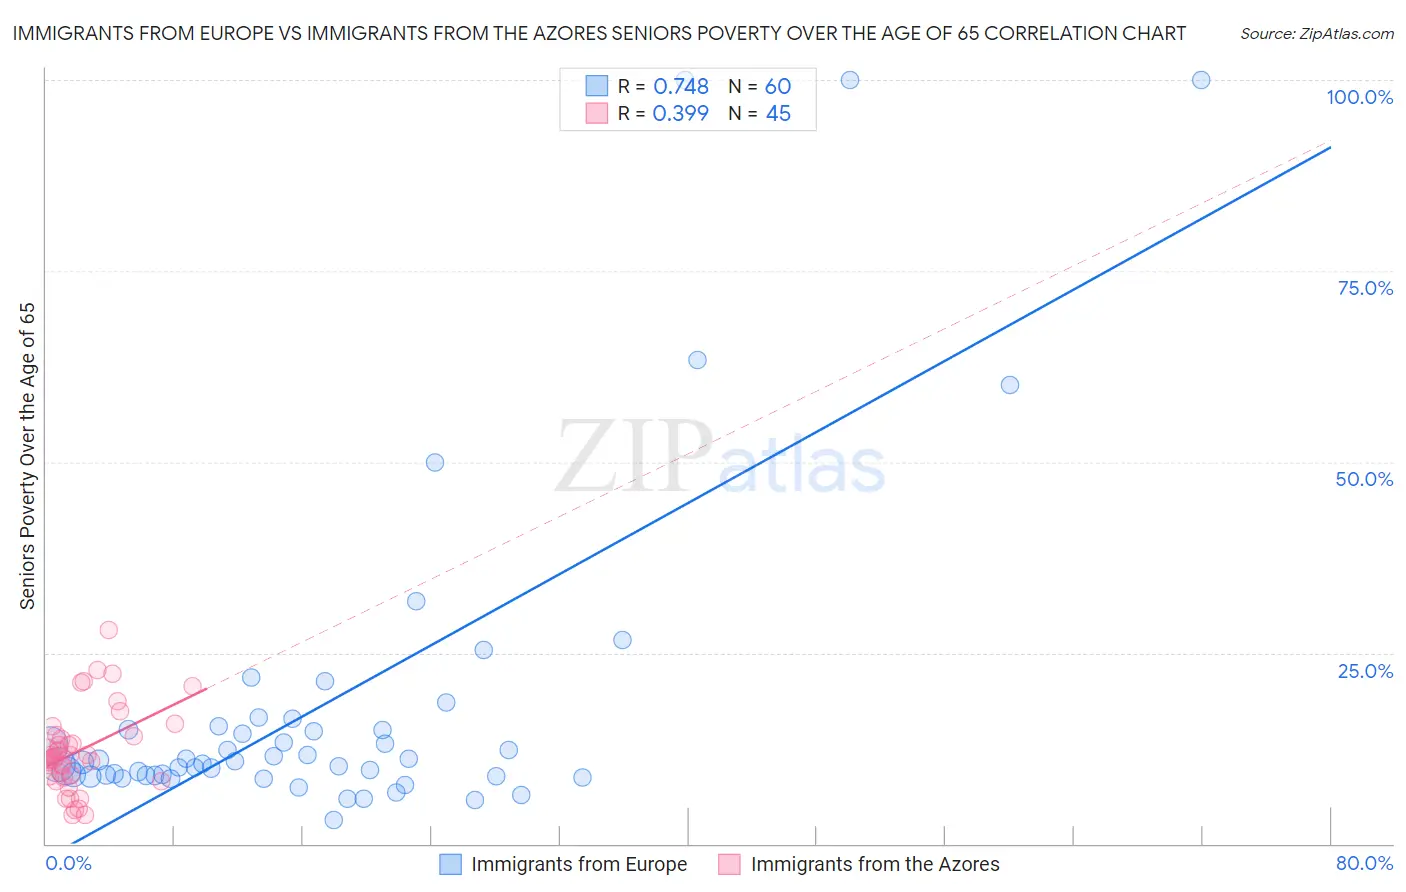 Immigrants from Europe vs Immigrants from the Azores Seniors Poverty Over the Age of 65